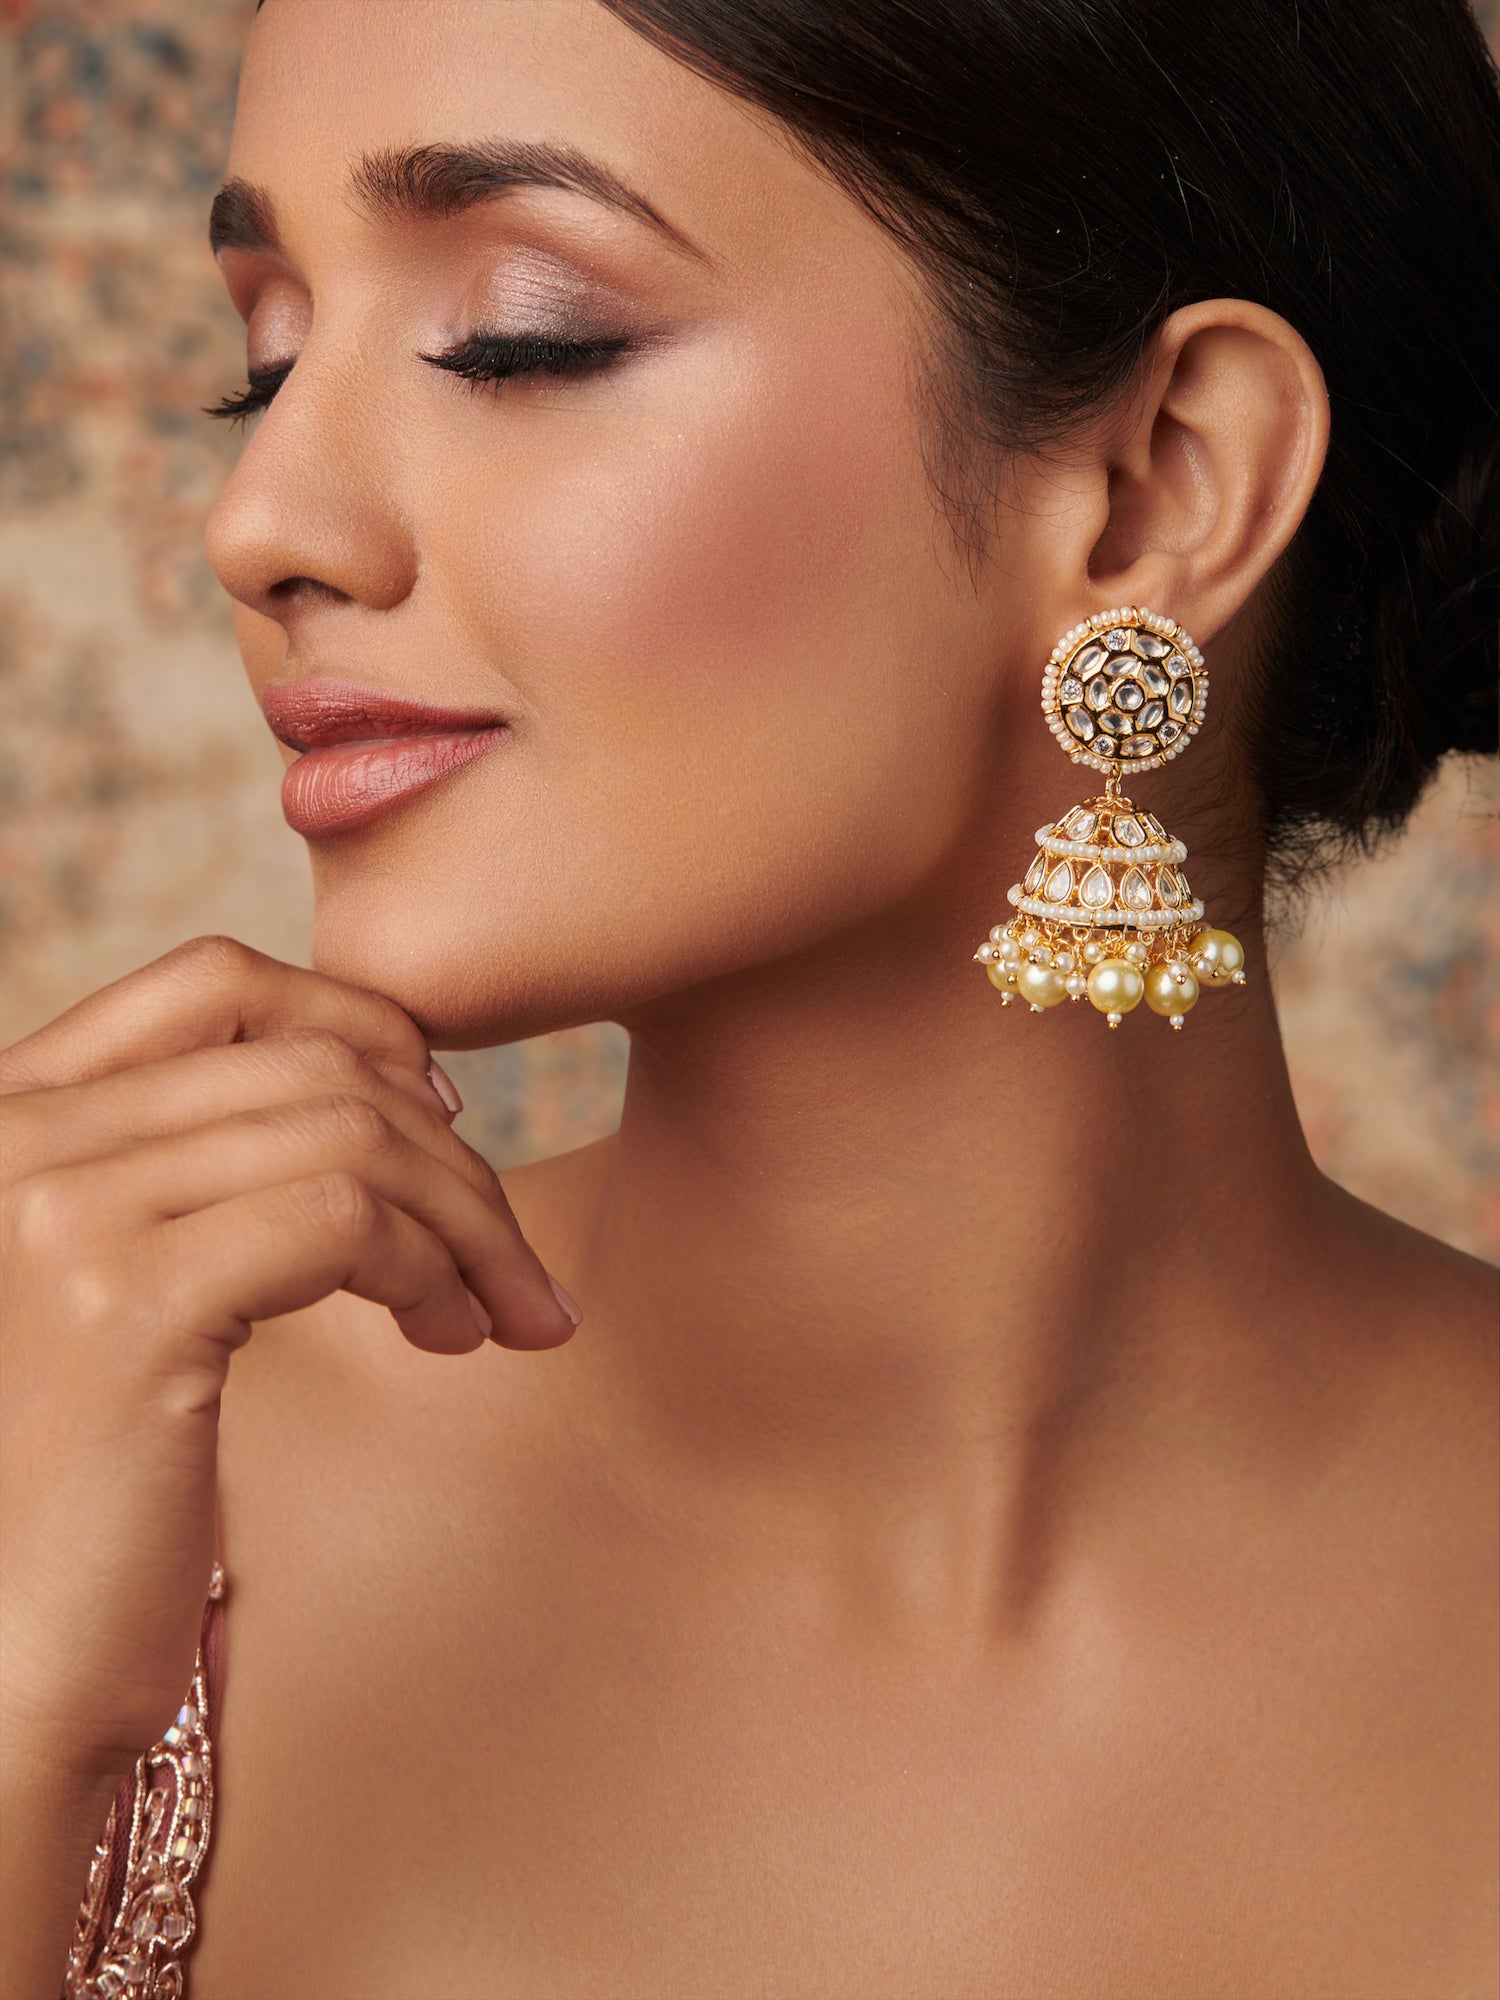 0 18 KT Gold Plated Kundan-Encrusted Jhumka Earrings with Pearl Drops